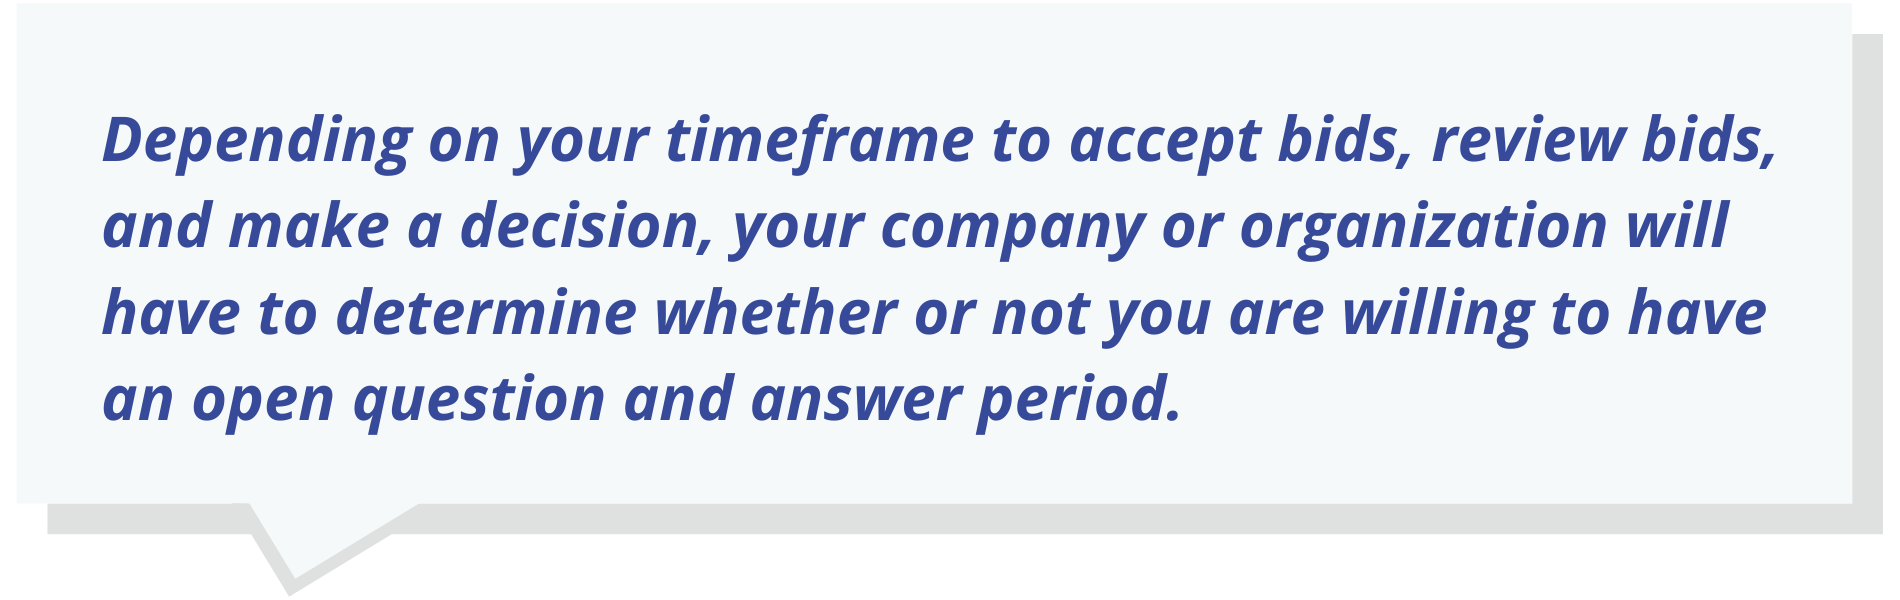 Depending on your timeframe to accept bids, review bids, and make a decision, your company or organization will have to determine whether or not you are willing to have an open question and answer period.